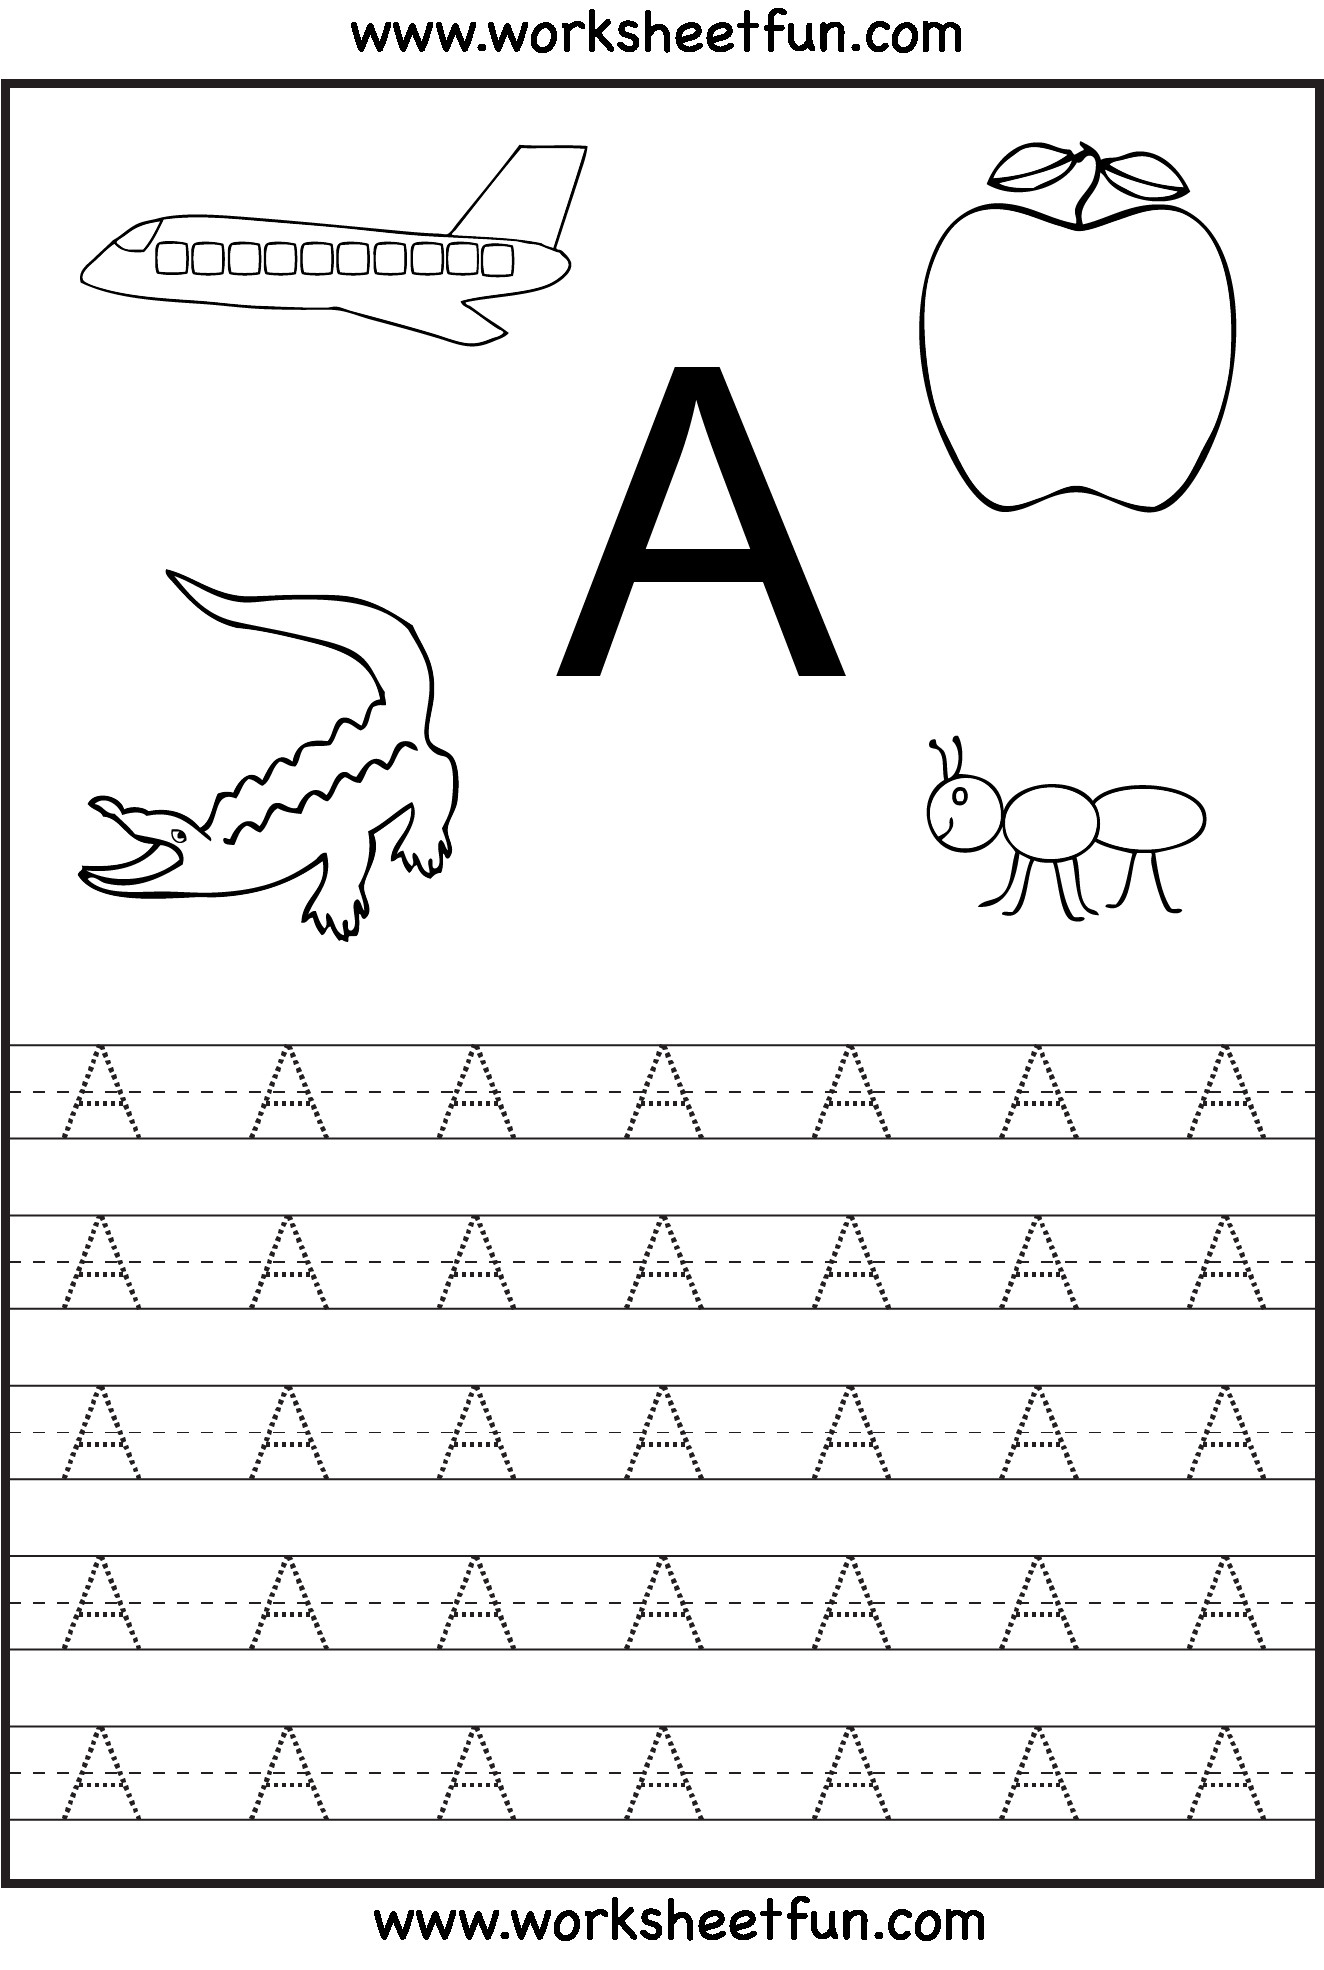 Worksheets For Year Olds Tracing Learning Printable Letter intended for Free Alphabet Worksheets For 3 Year Olds